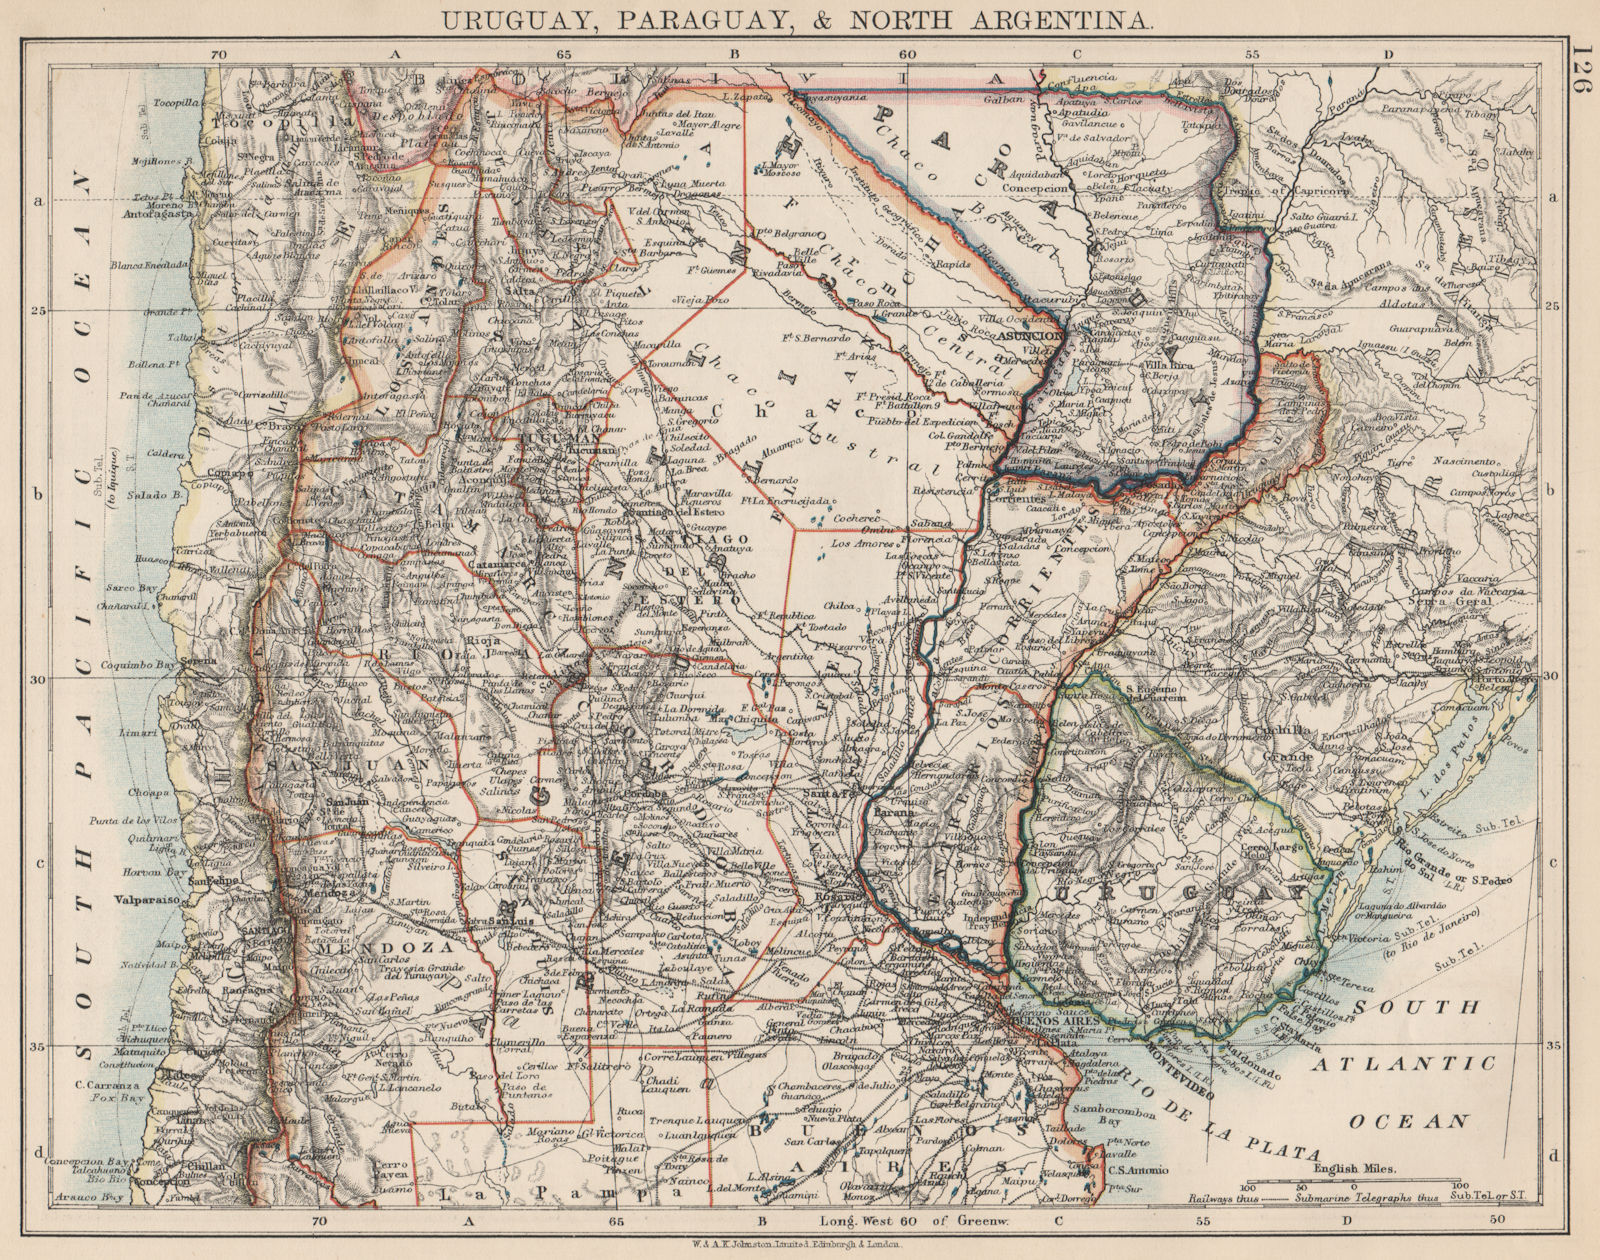 Associate Product URUGUAY PARAGUAY NORTH ARGENTINA. River Plate States Chile. JOHNSTON 1903 map